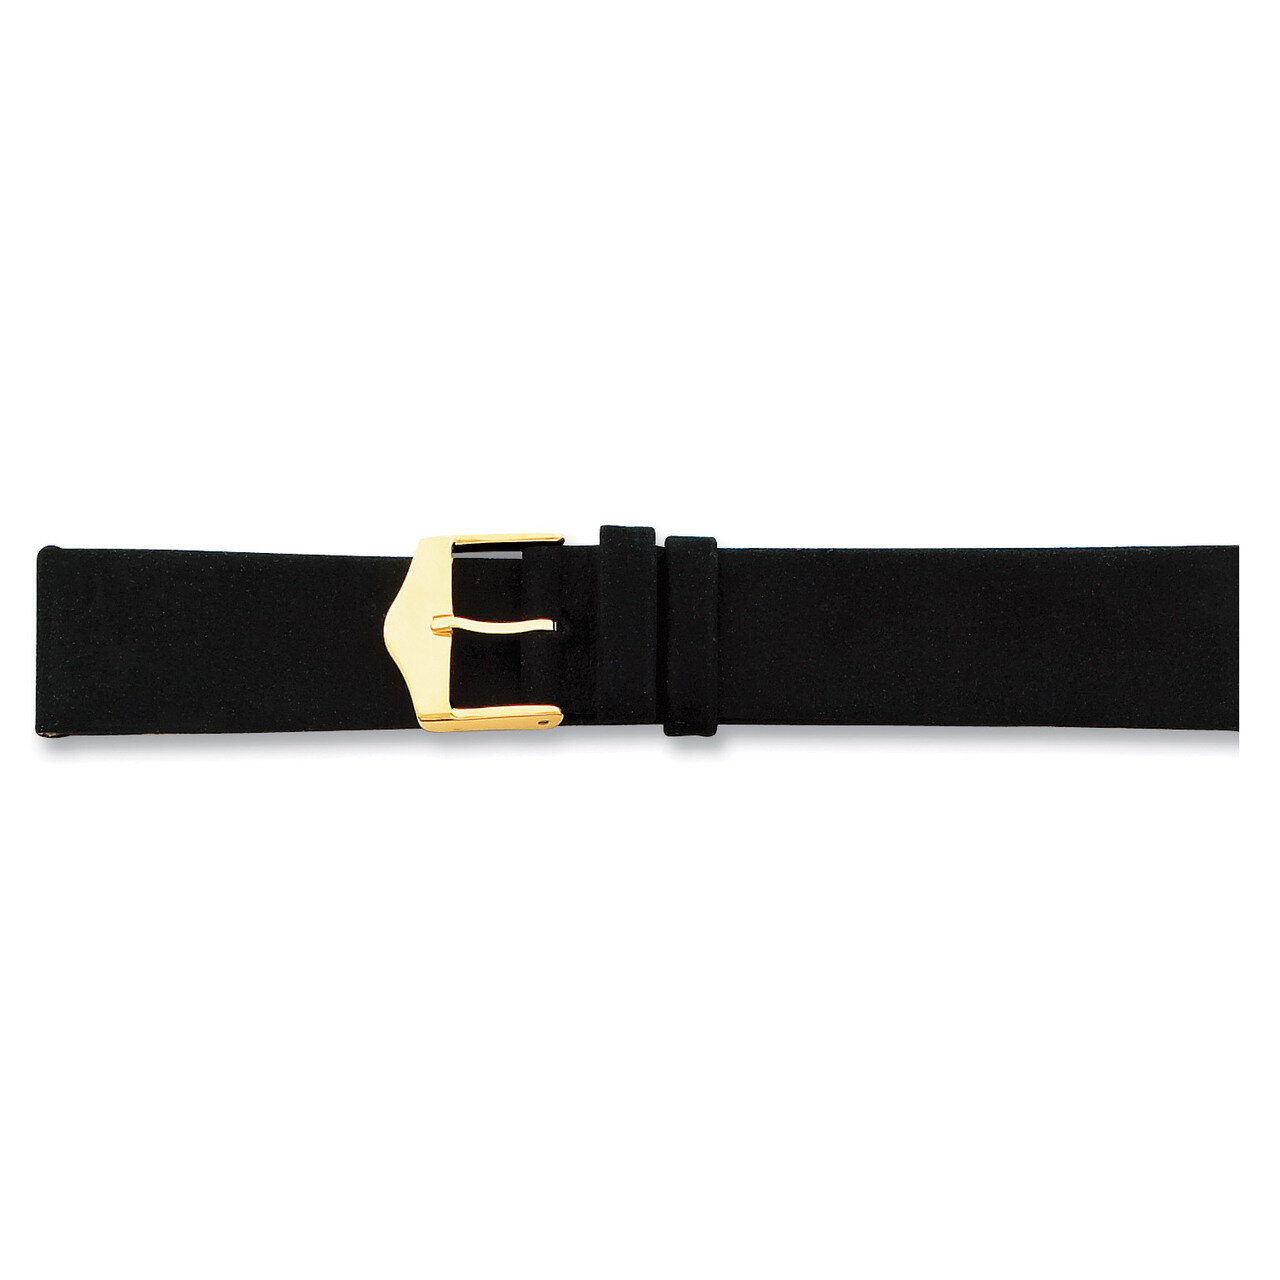 17mm Black Suede Leather Buckle Watch Band 7.5 Inch Gold-tone BA120-17